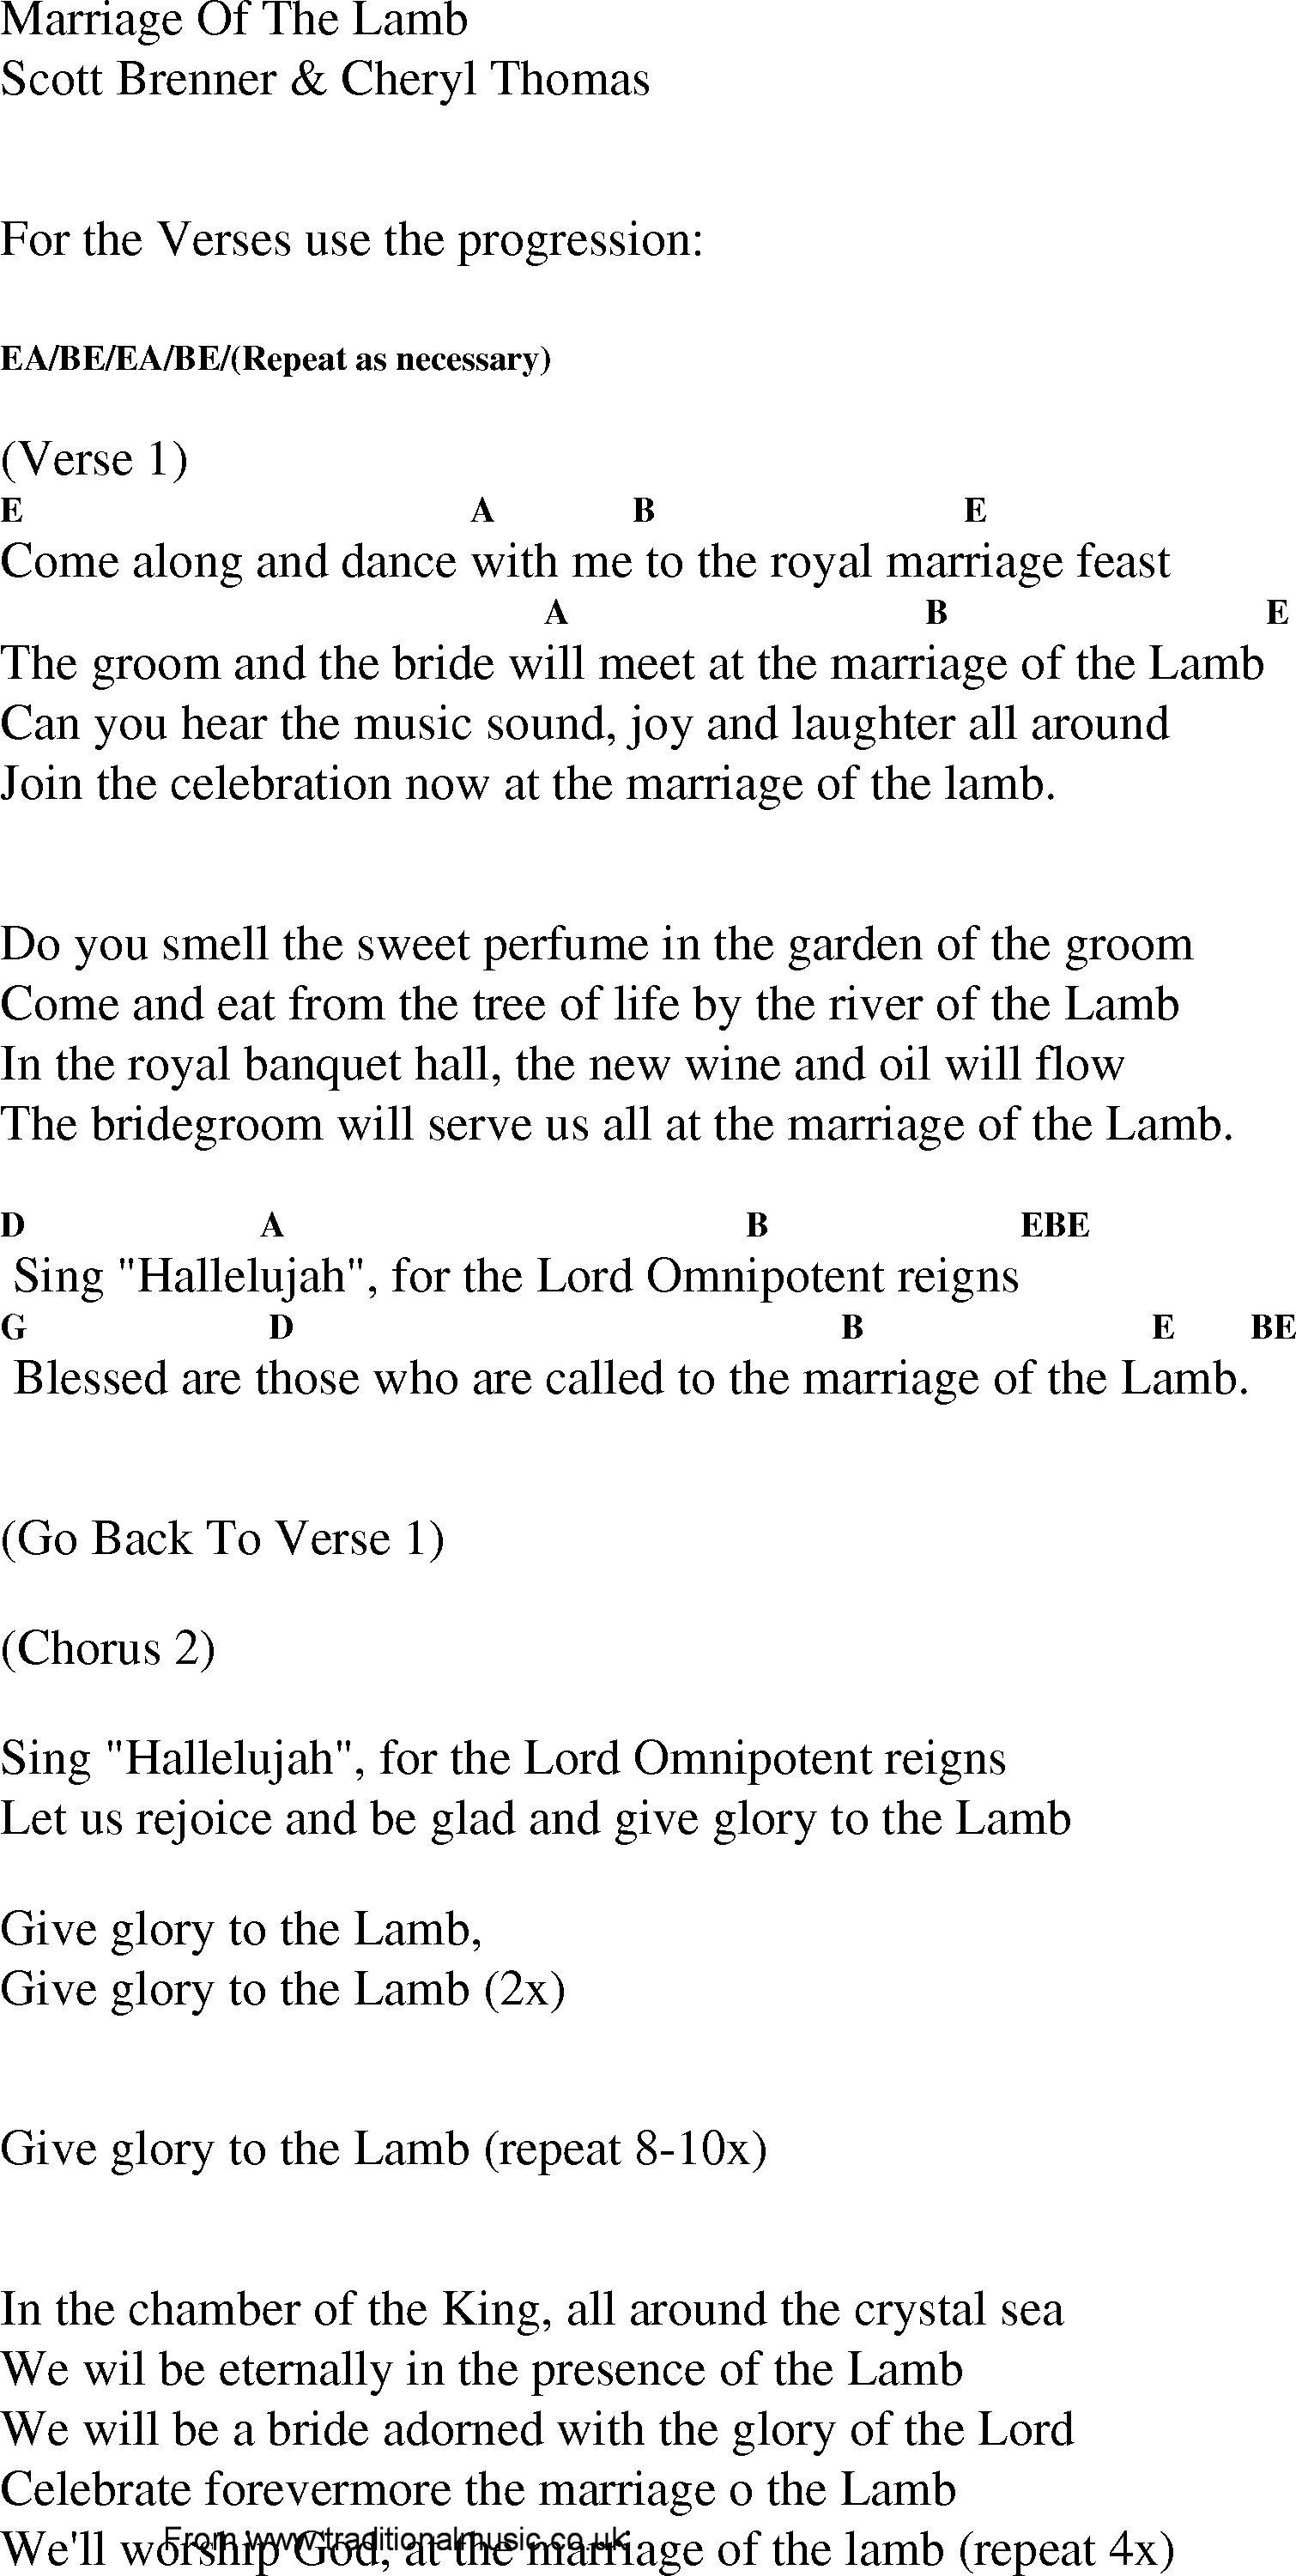 Gospel Song: marriage_of_the_lamb, lyrics and chords.